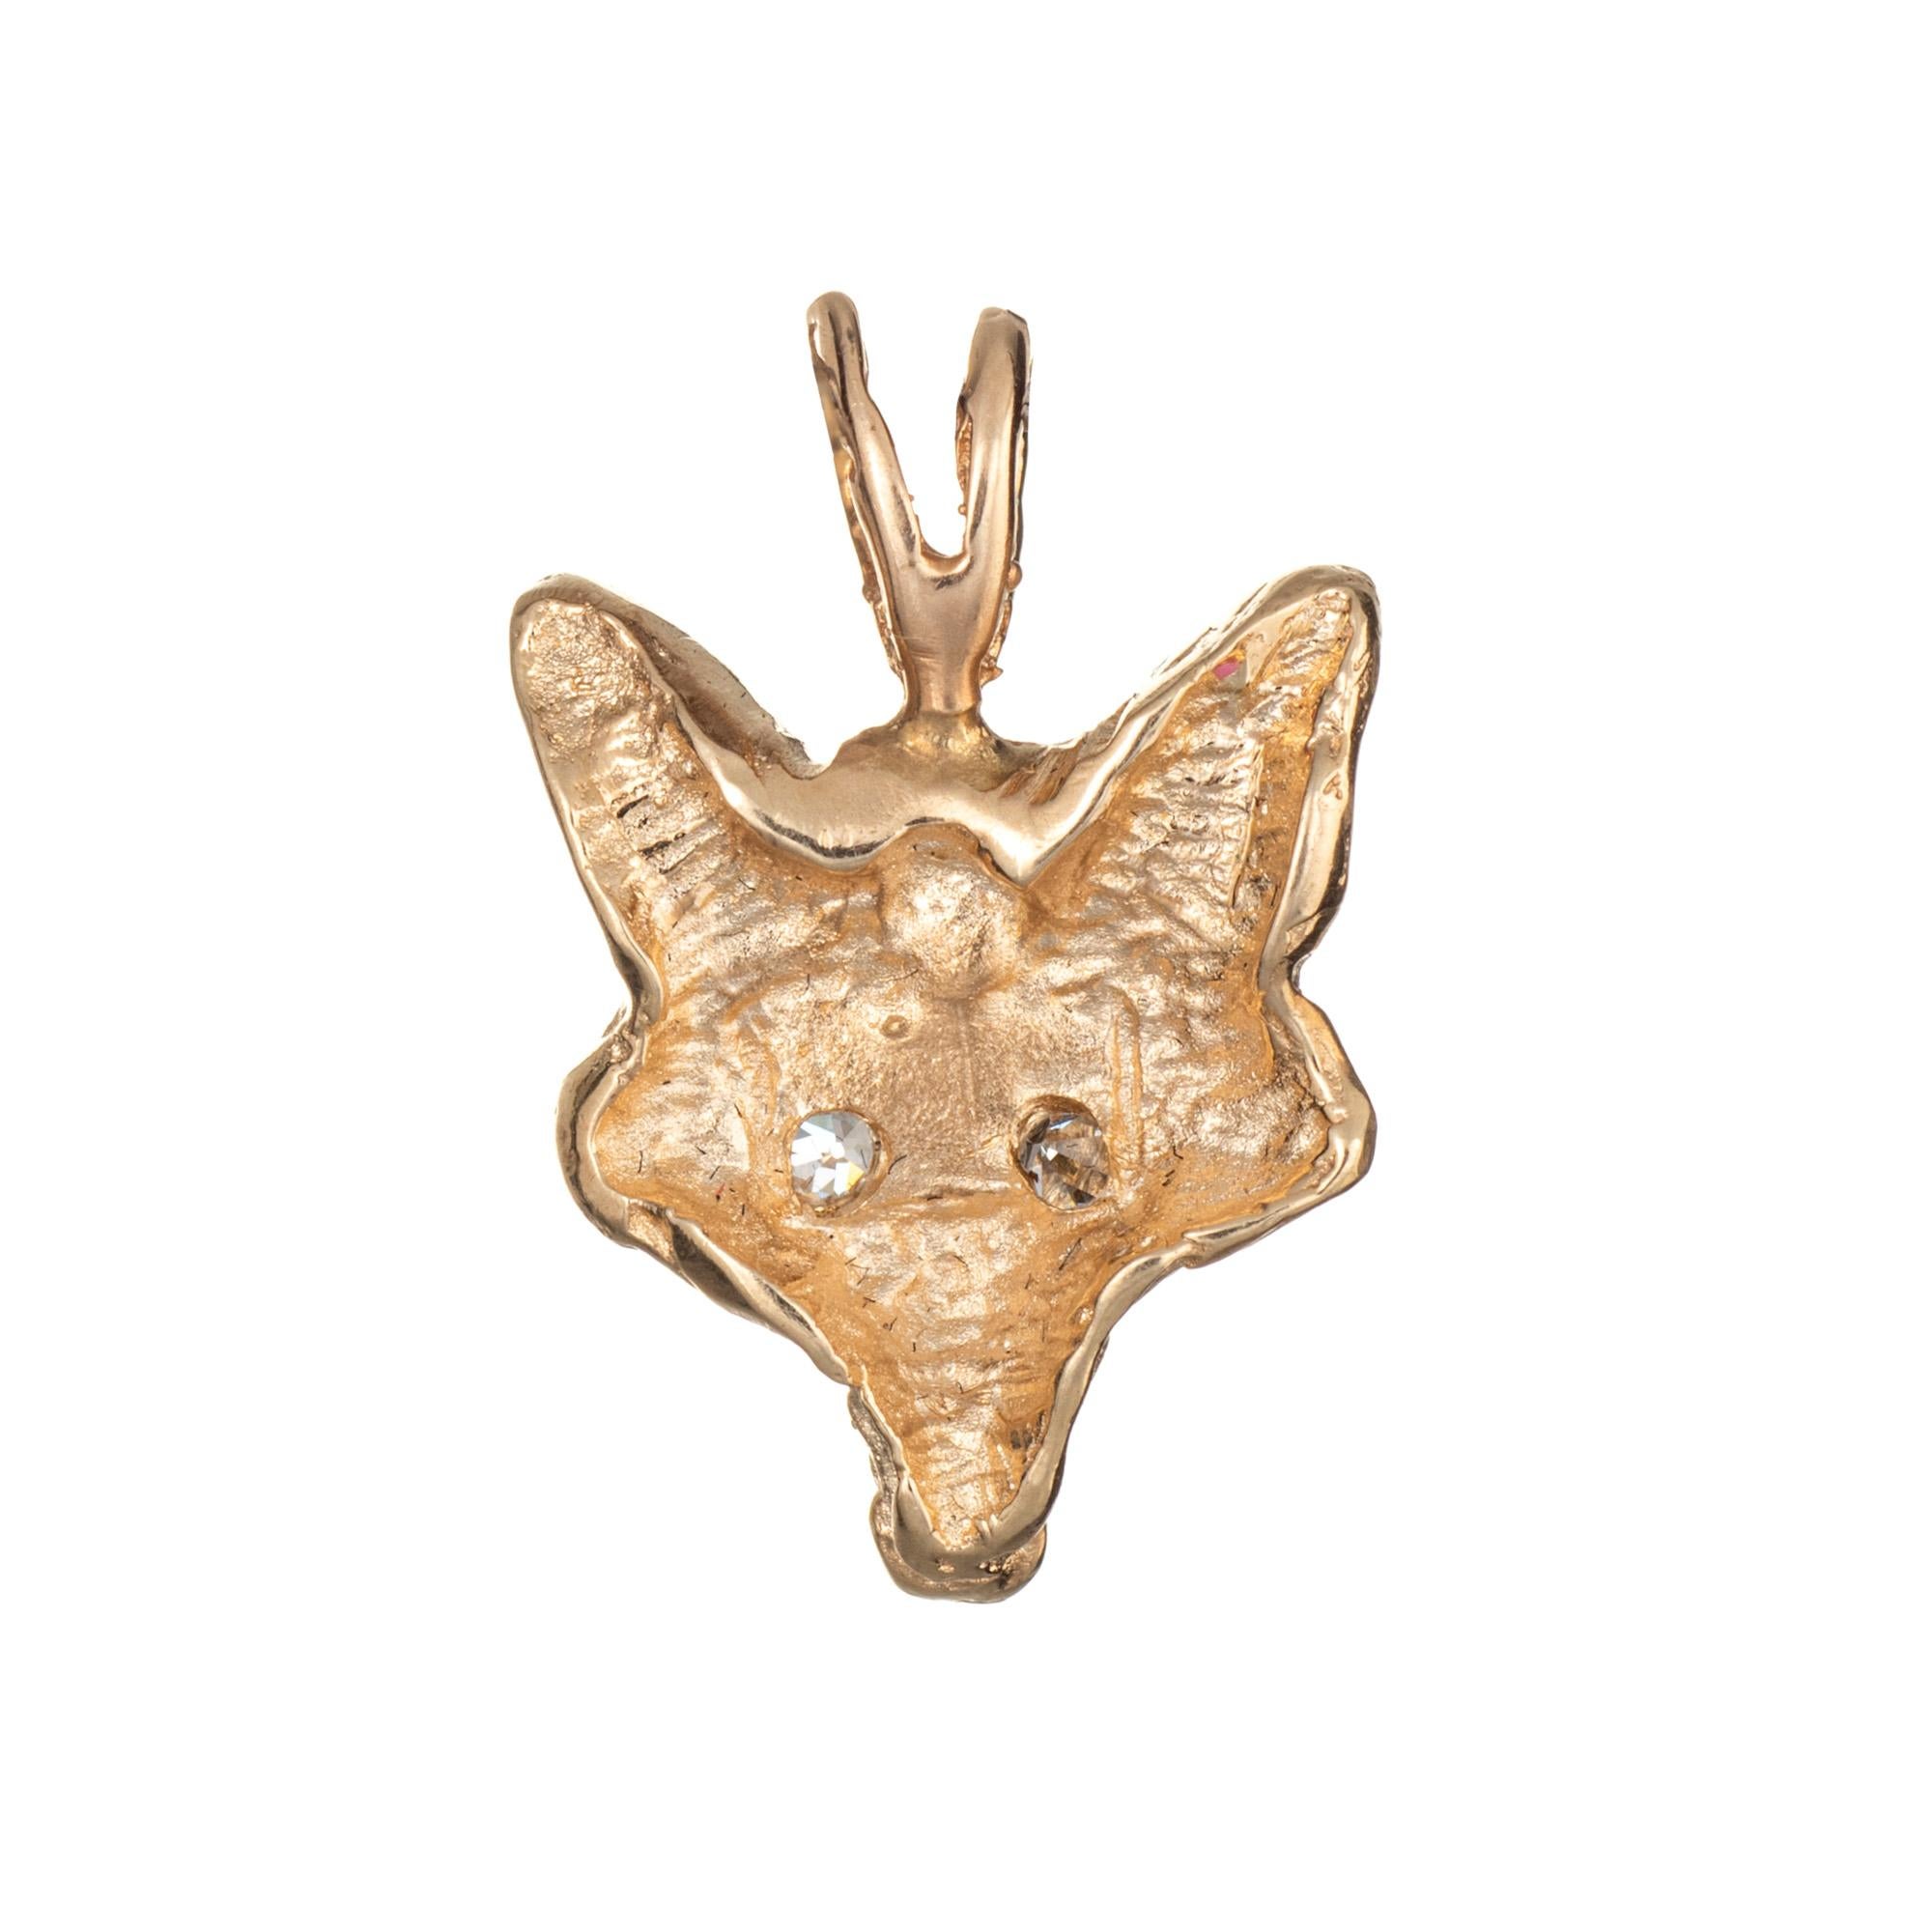 Finely detailed vintage Fox pendant (or charm) crafted in 14k yellow gold.  

Two estimated 0.01 carat single cut diamonds are set into the eyes (estimated at H-I color and VS2 clarity).

The nicely detailed pendant is small in scale and features